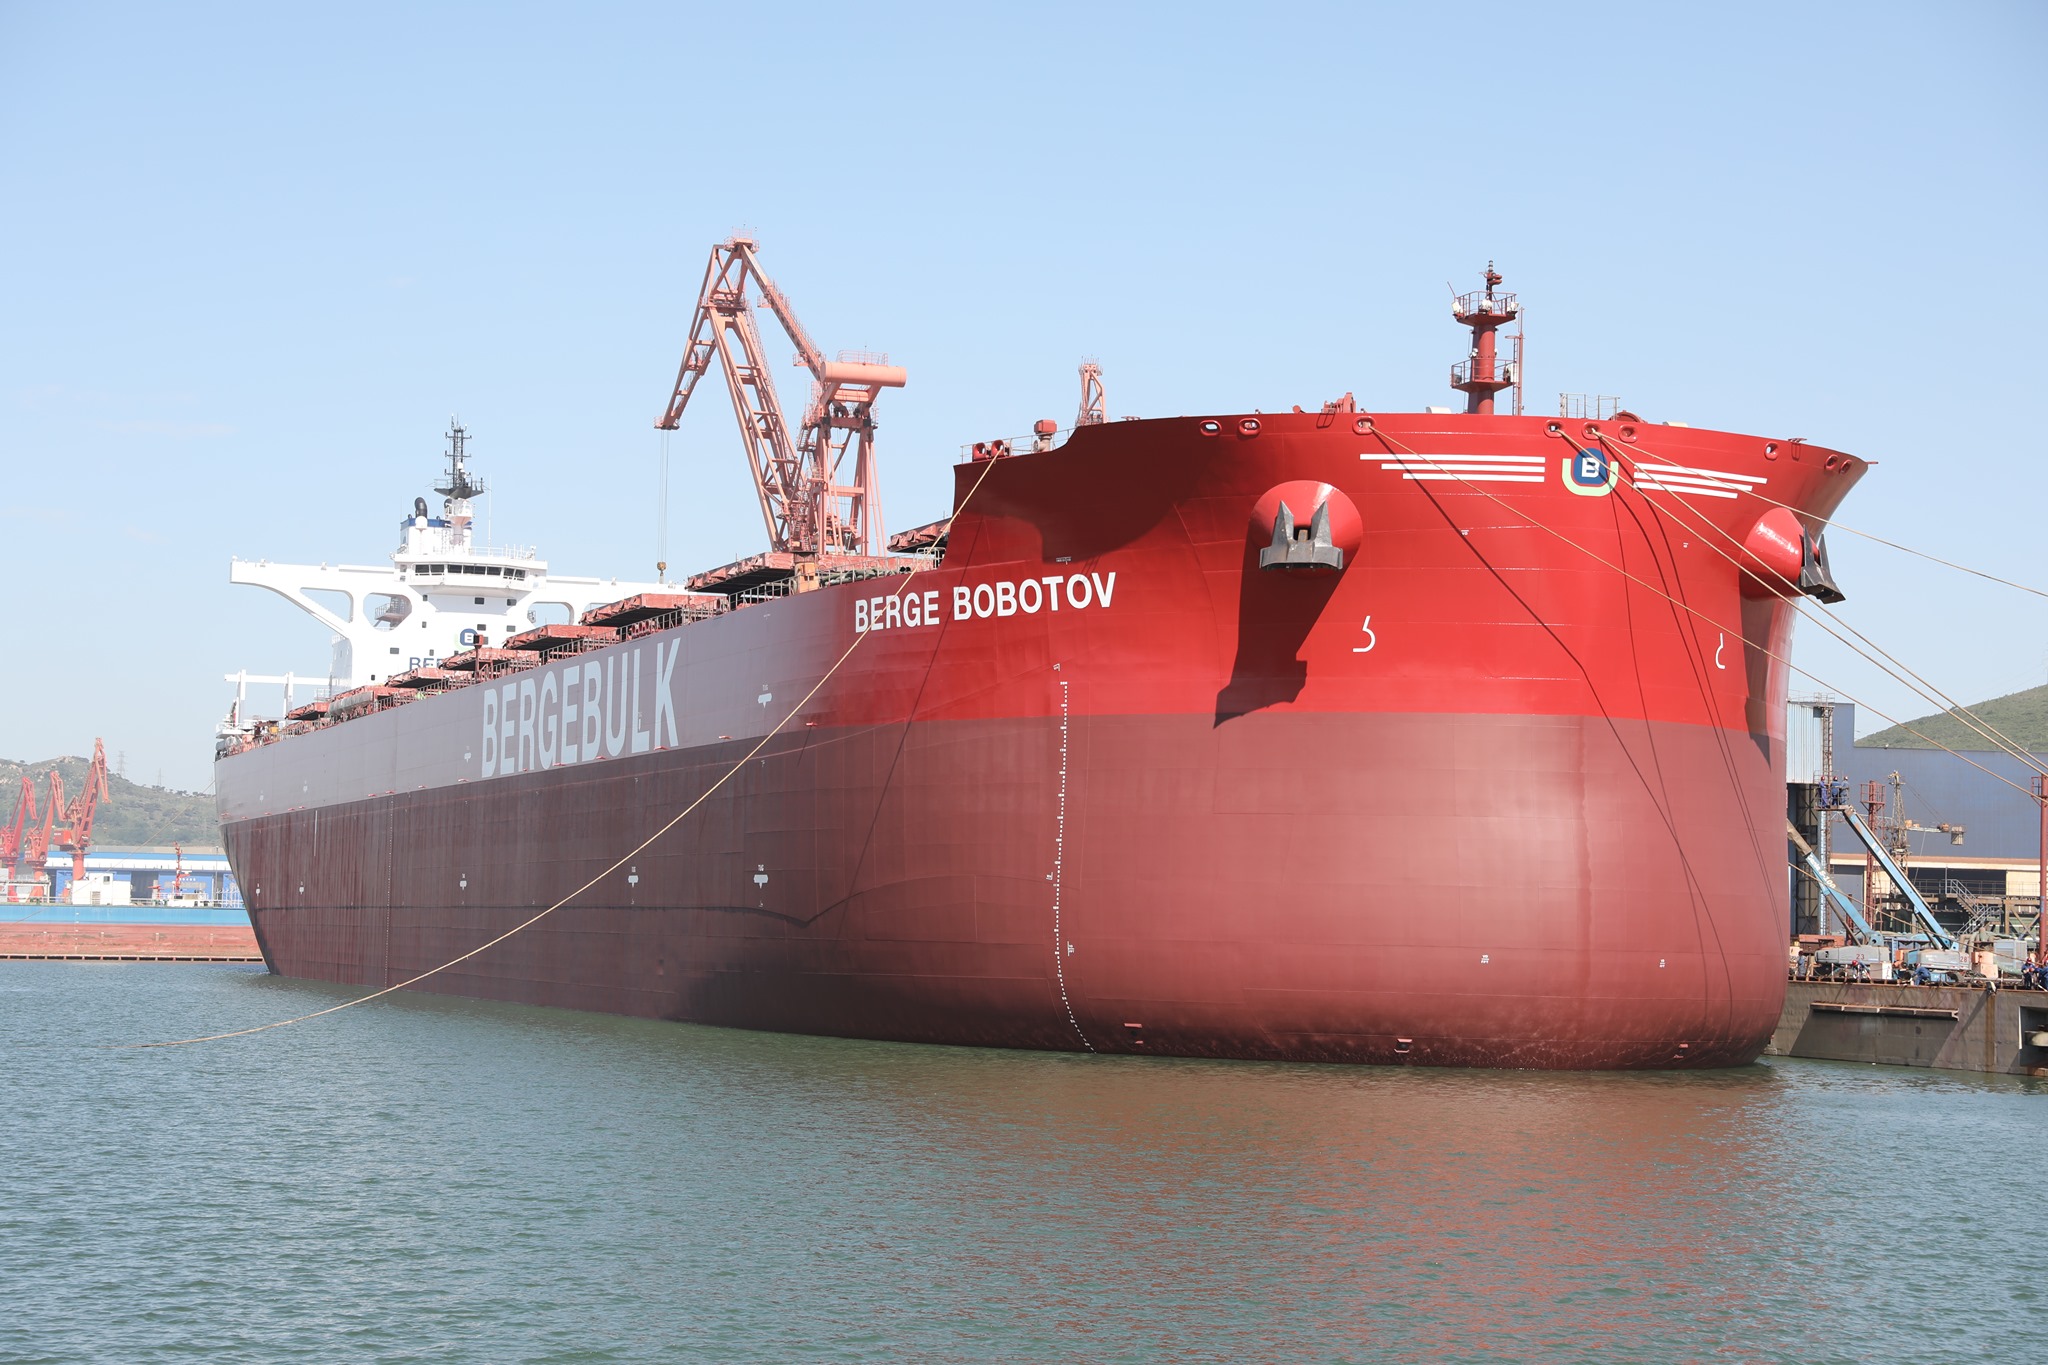 Berge Bulk welcomes the newest addition to its fleet: Berge Bobotov